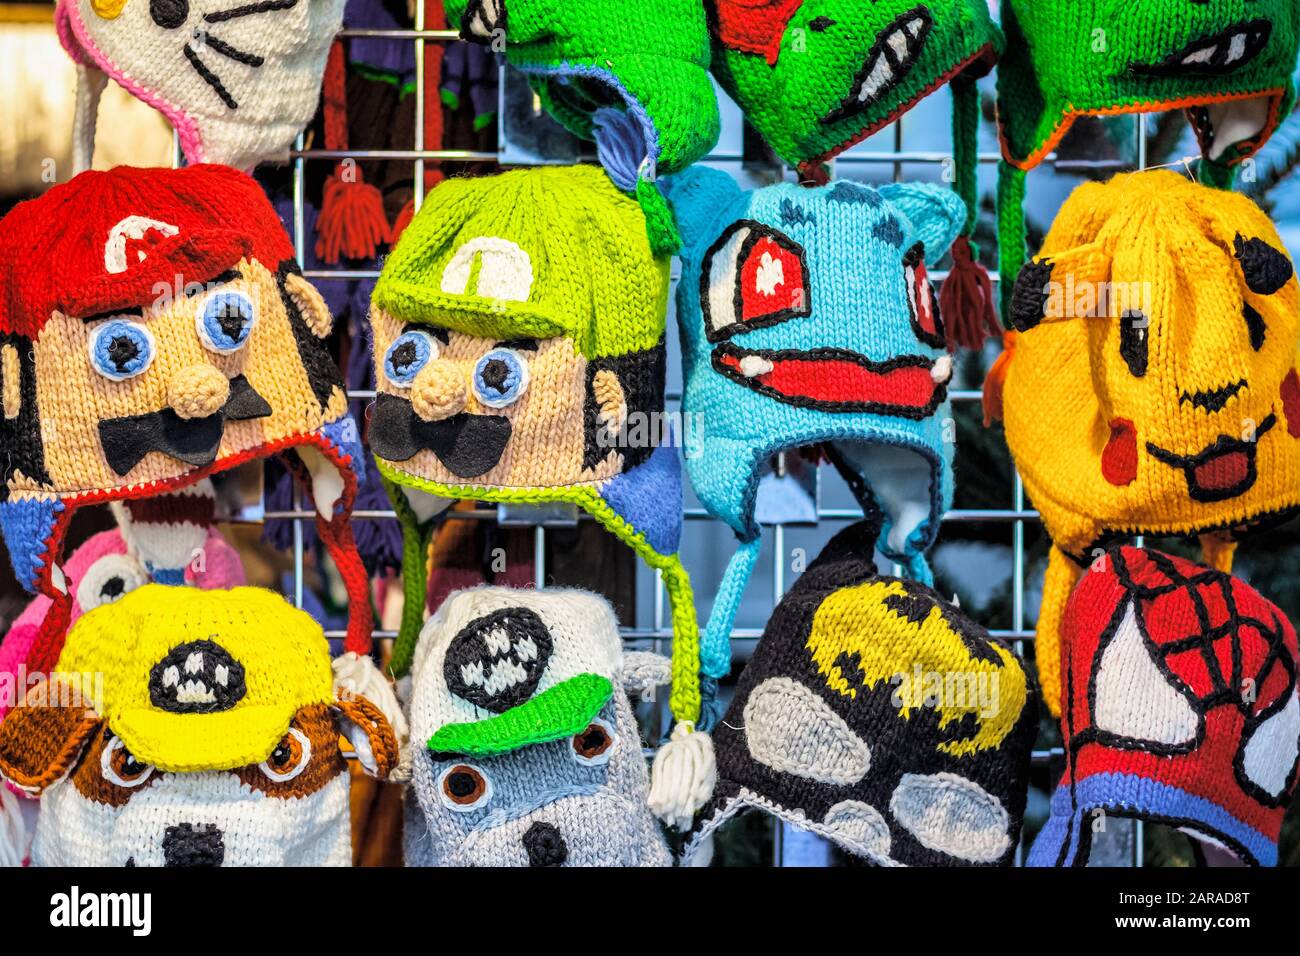 London, UK - November 27, 2019 - Crochet knitted hats in different cartoon characters on display at Christmas market in Winter Wonderland Stock Photo